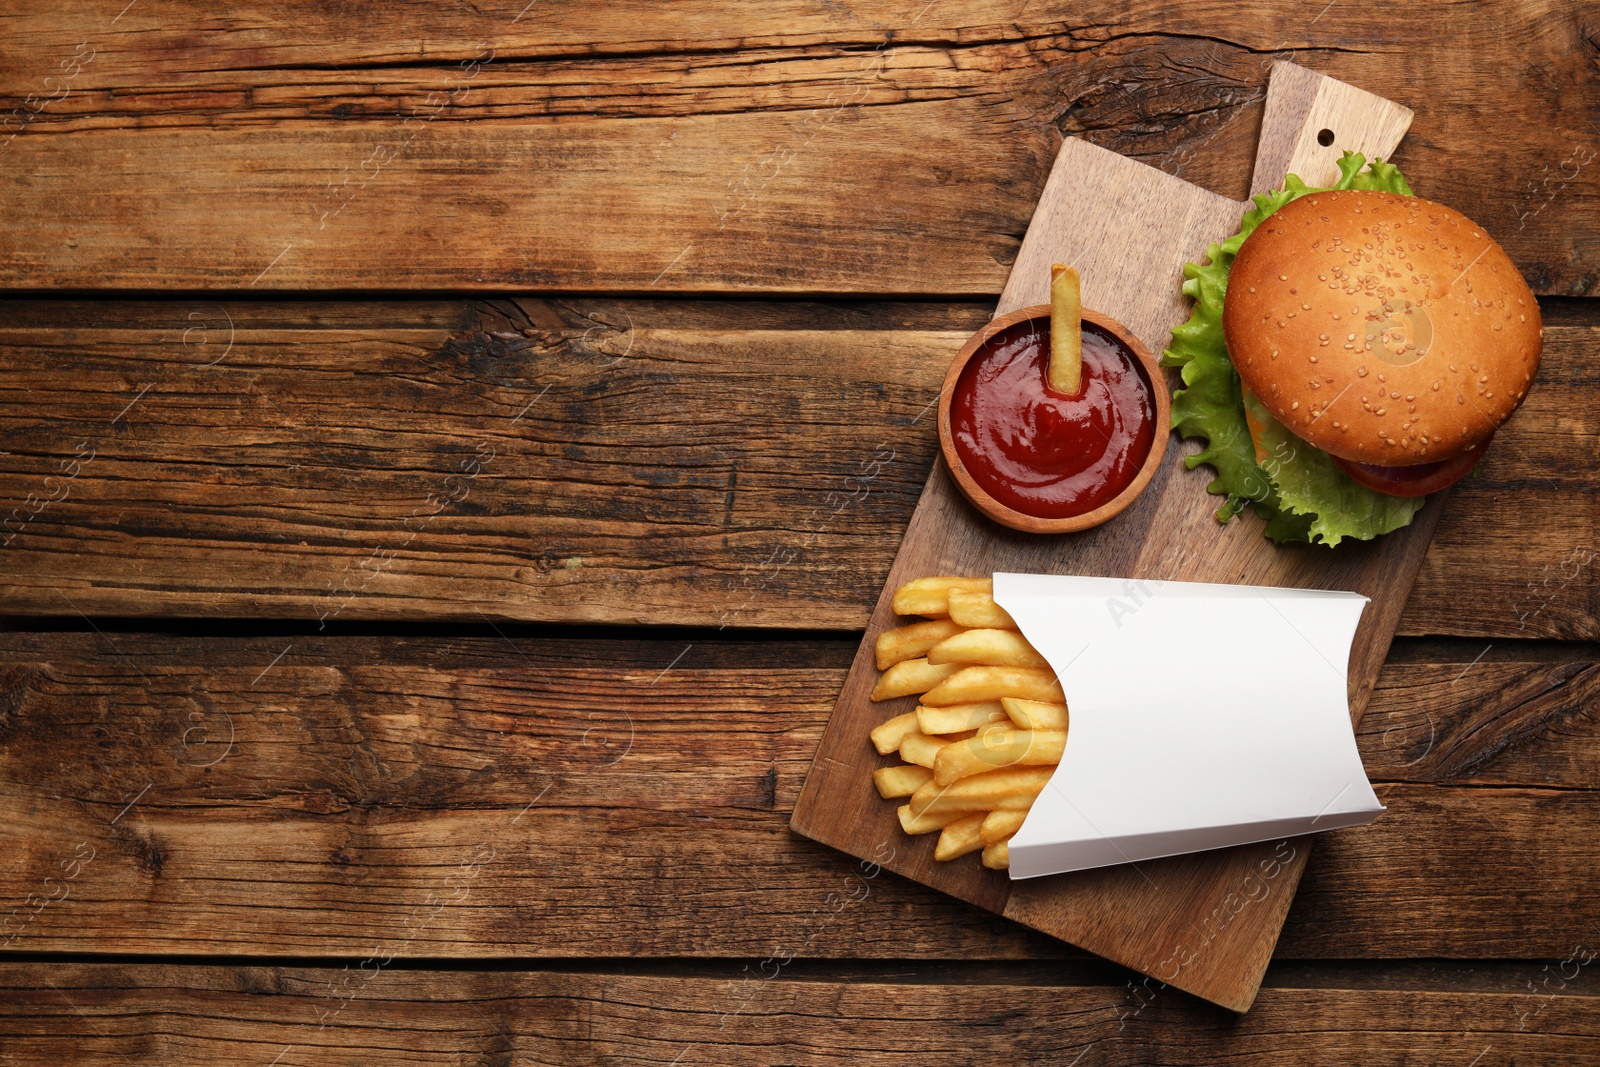 Photo of French fries, tasty burger and sauce on wooden table, top view. Space for text